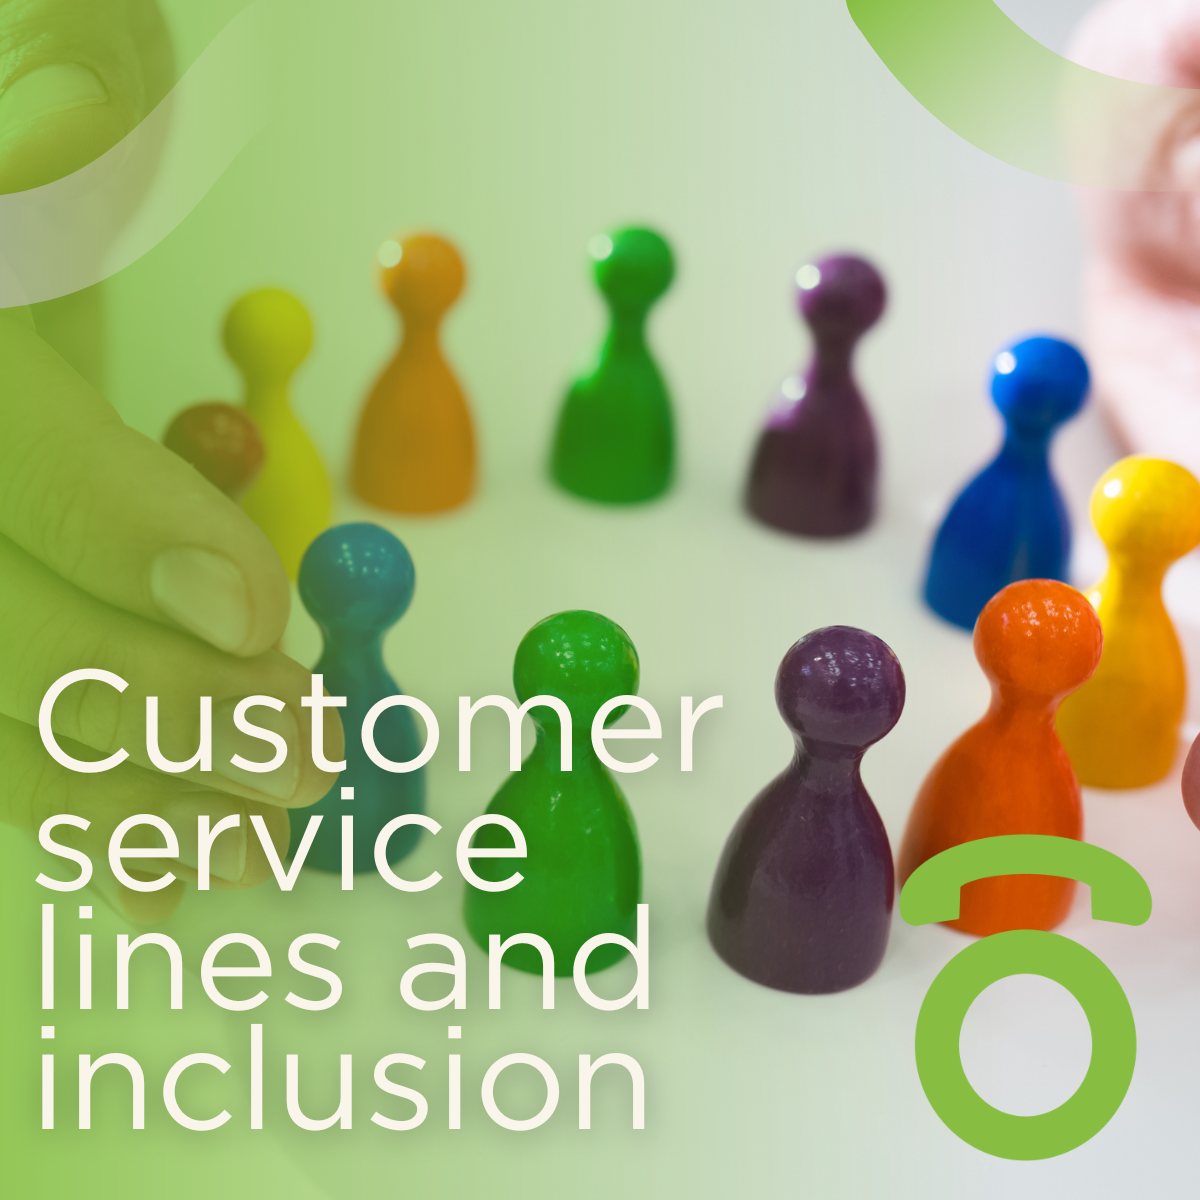 Five ways a telephone answering service can make your business more inclusive.